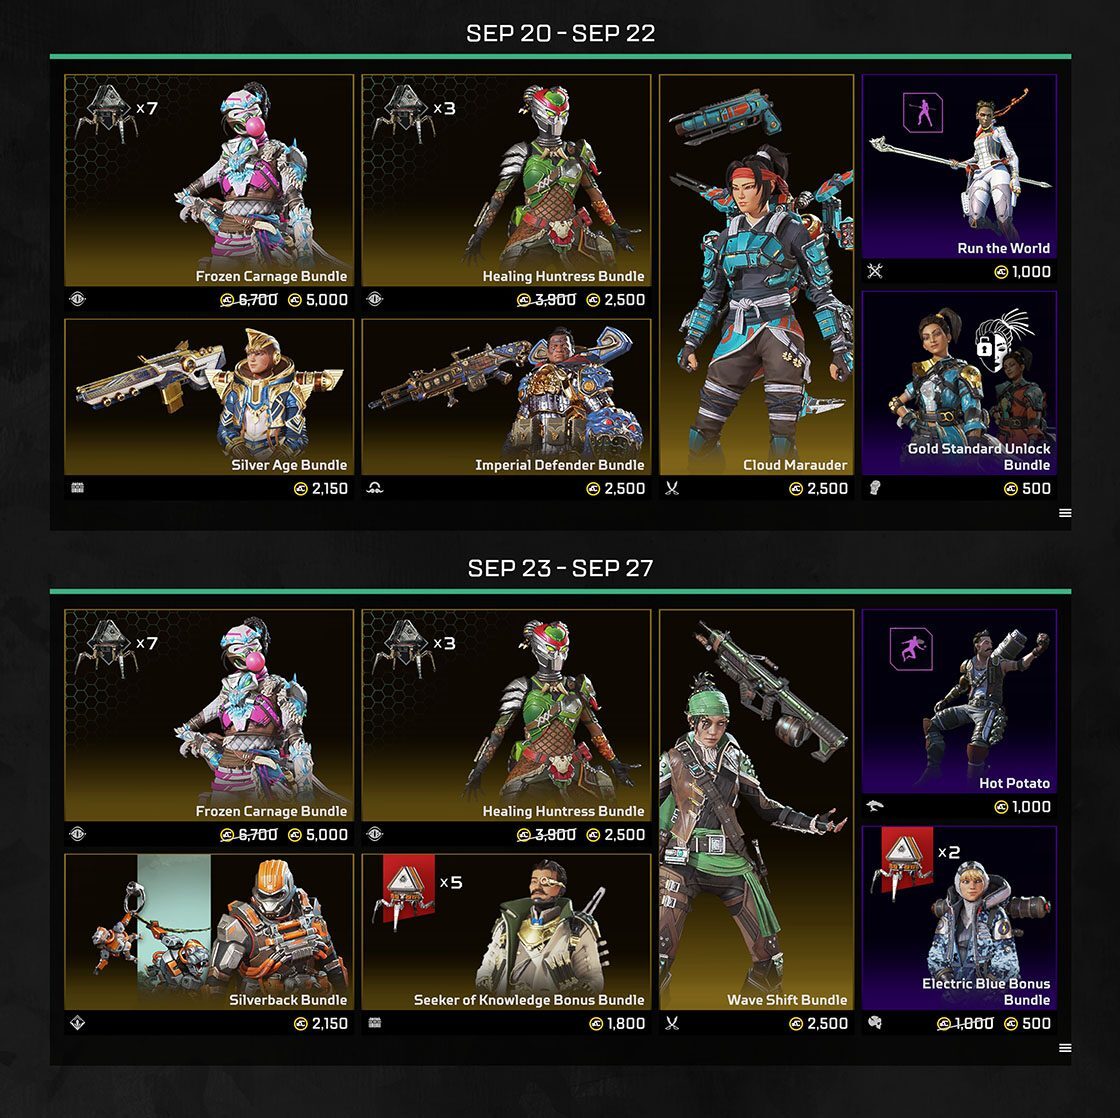 The store bundle features both old and new skins.